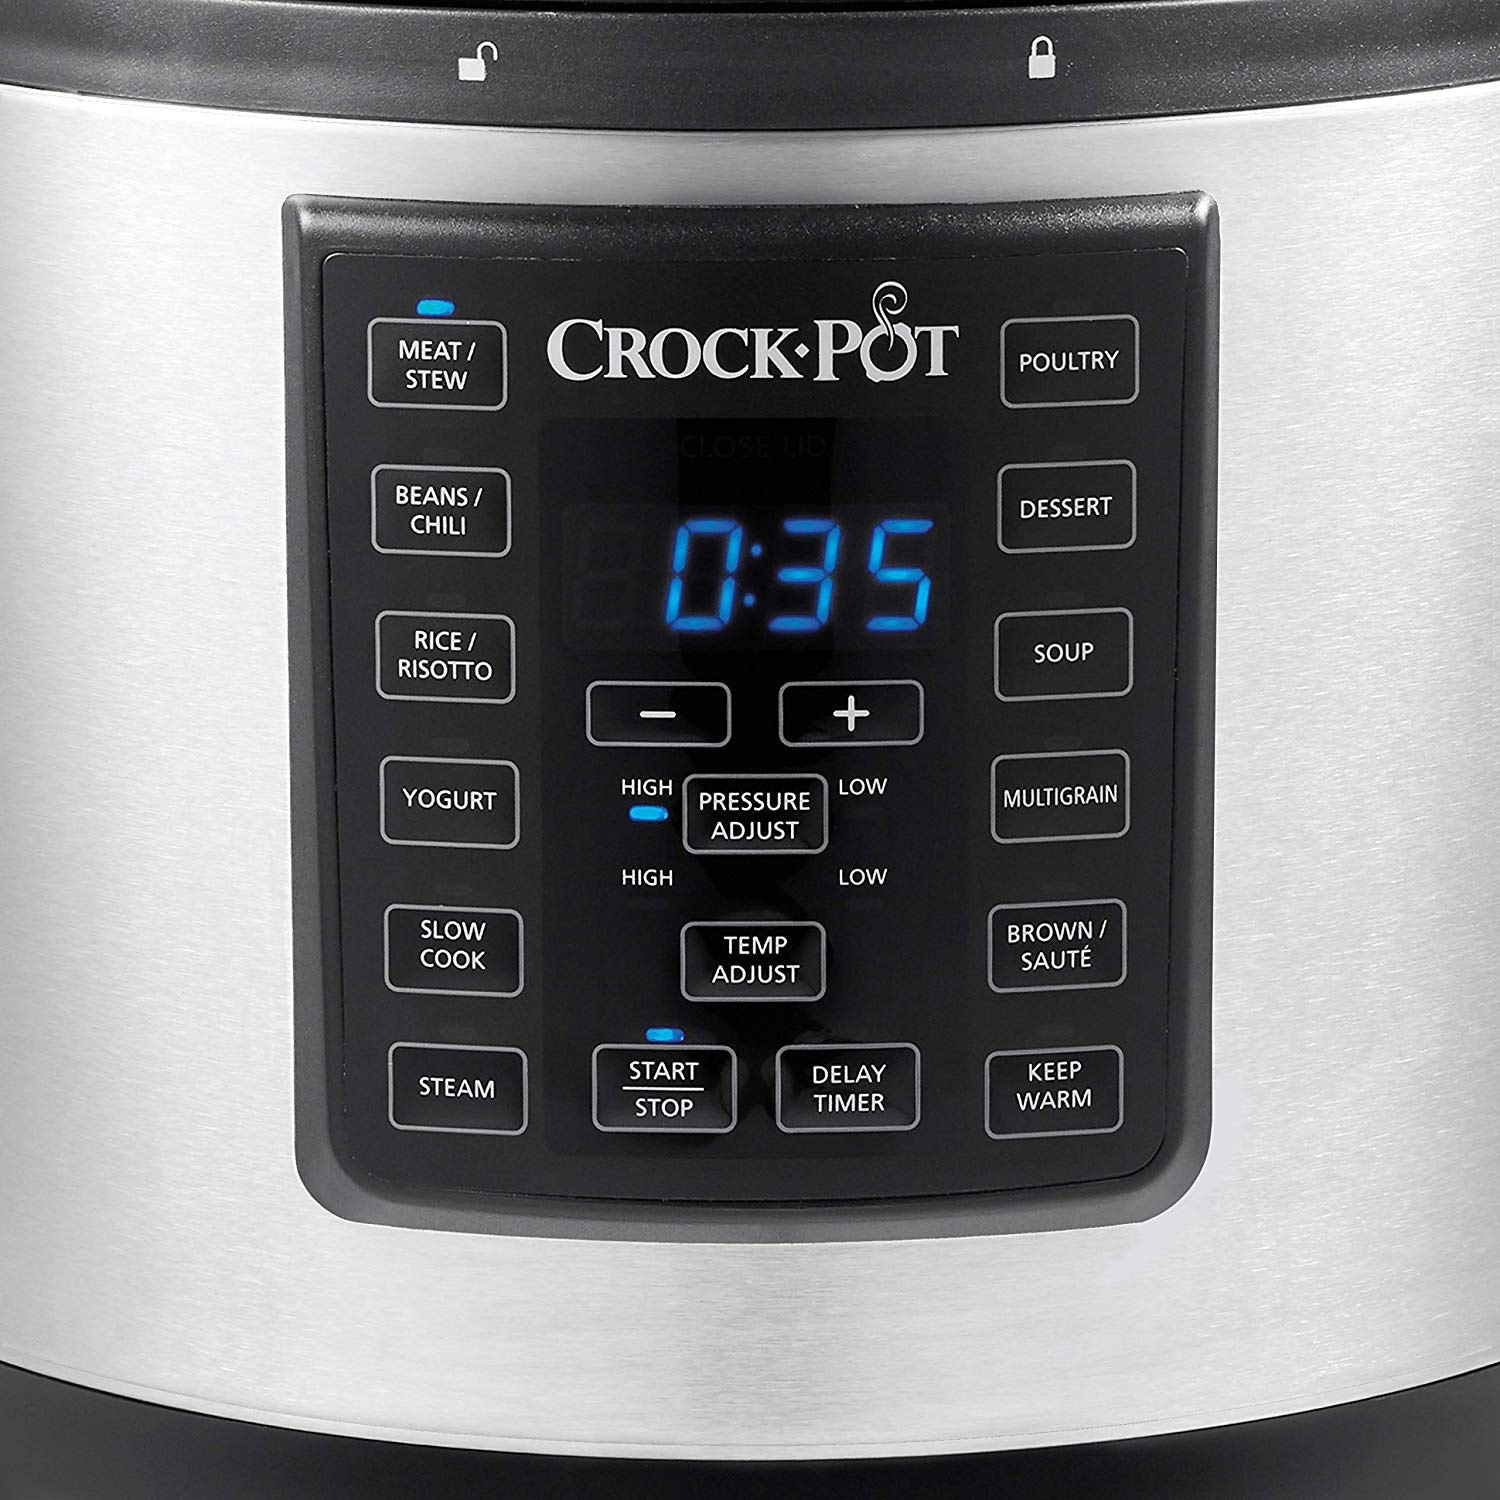 https://ak1.ostkcdn.com/images/products/is/images/direct/59608e186c2ae085ae3178503f1f9616fb5aafc5/Crock-Pot-8-In-1-Multi-Use-Express-Cooker%2C-Silver-Black%2C-6-Quarts.jpg